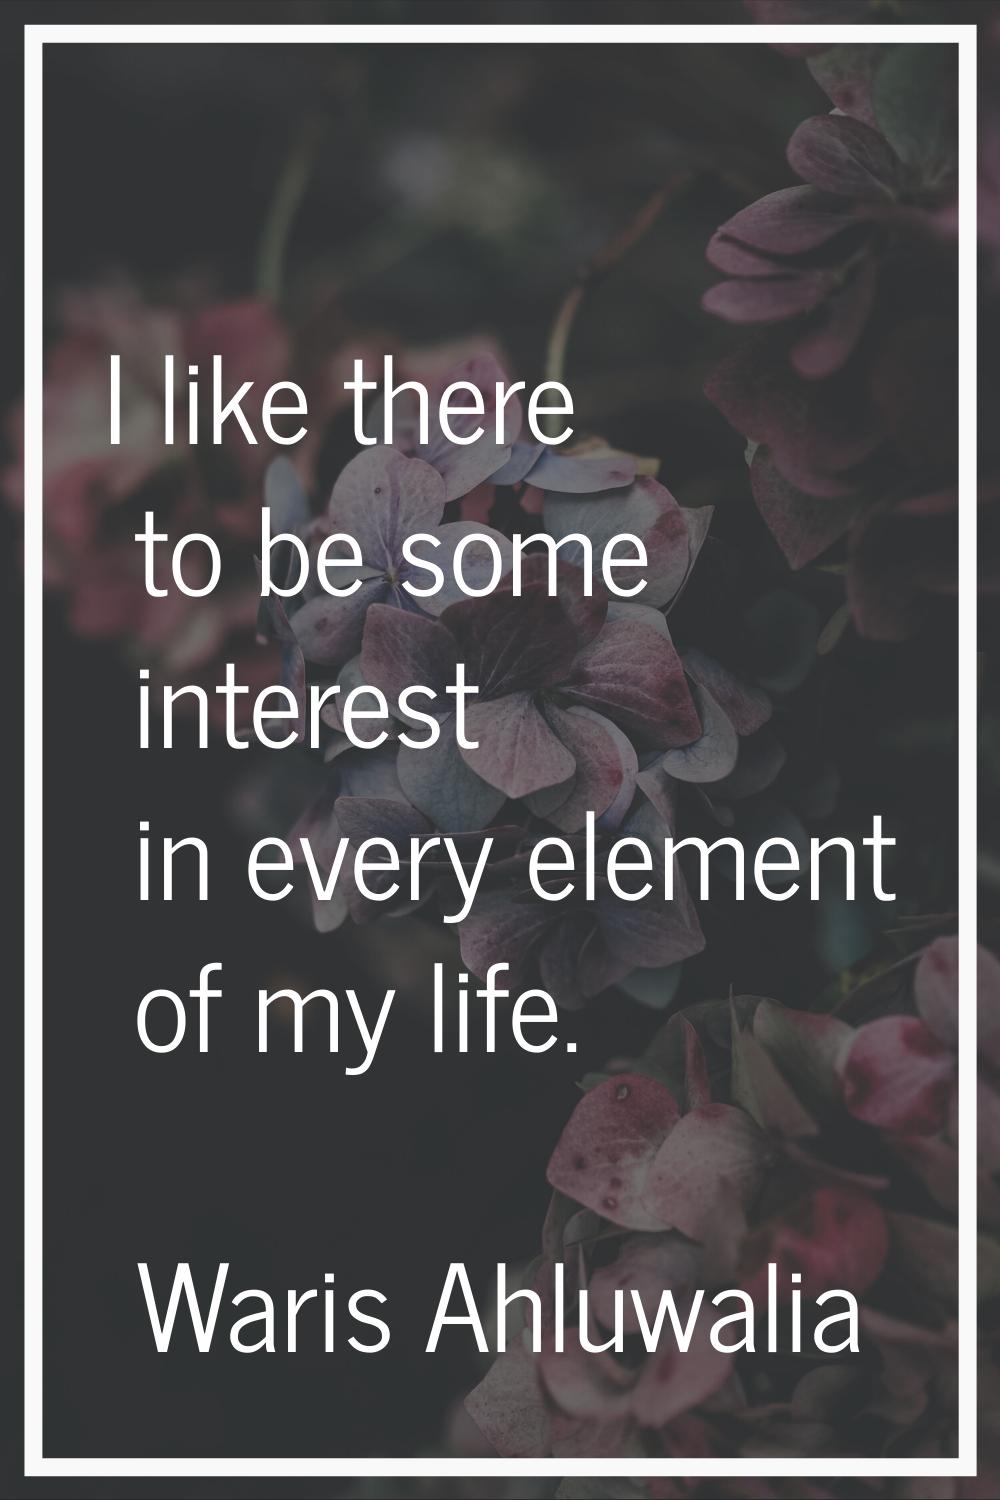 I like there to be some interest in every element of my life.